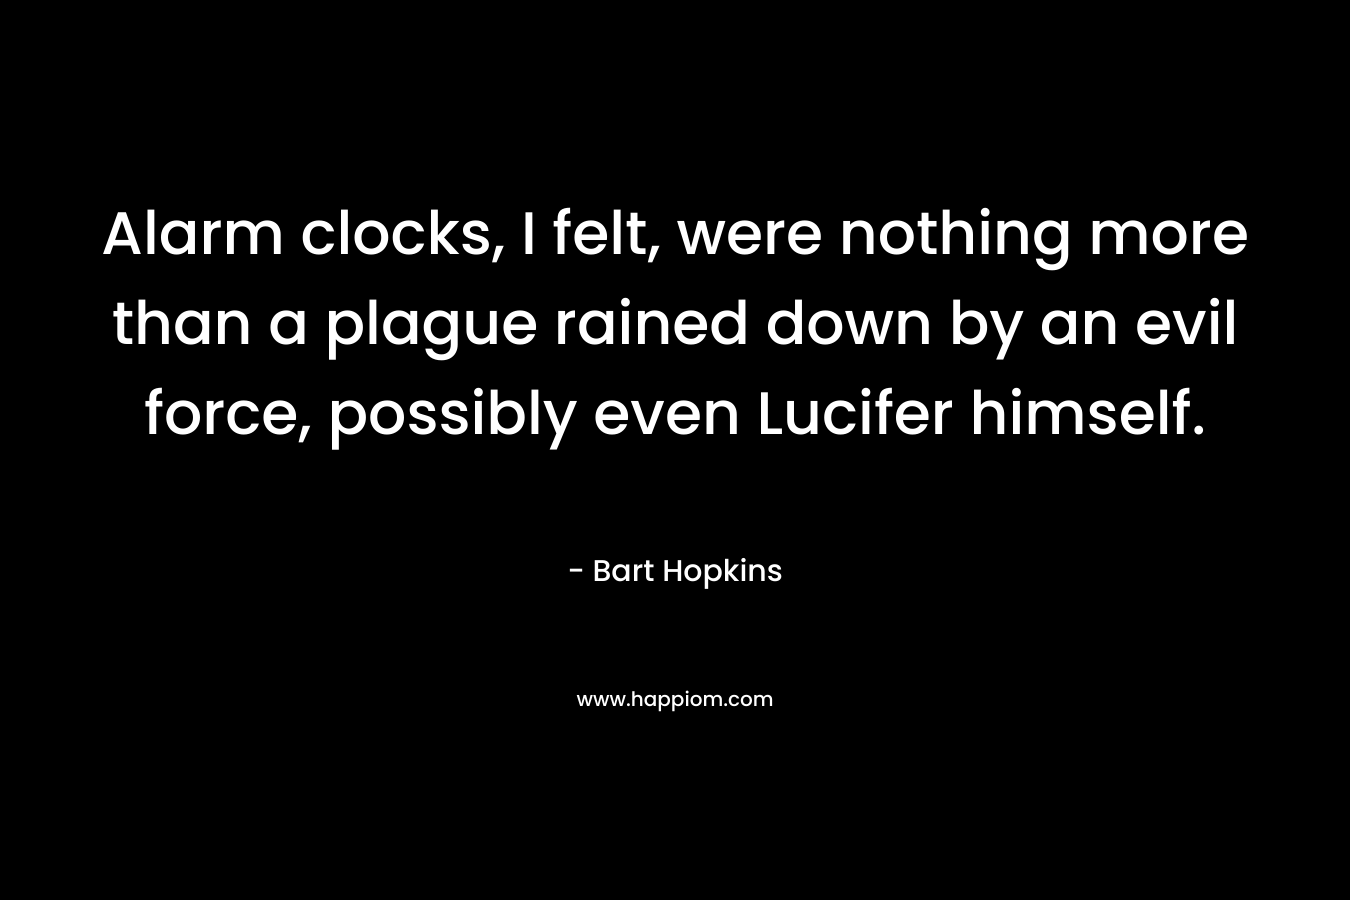 Alarm clocks, I felt, were nothing more than a plague rained down by an evil force, possibly even Lucifer himself.